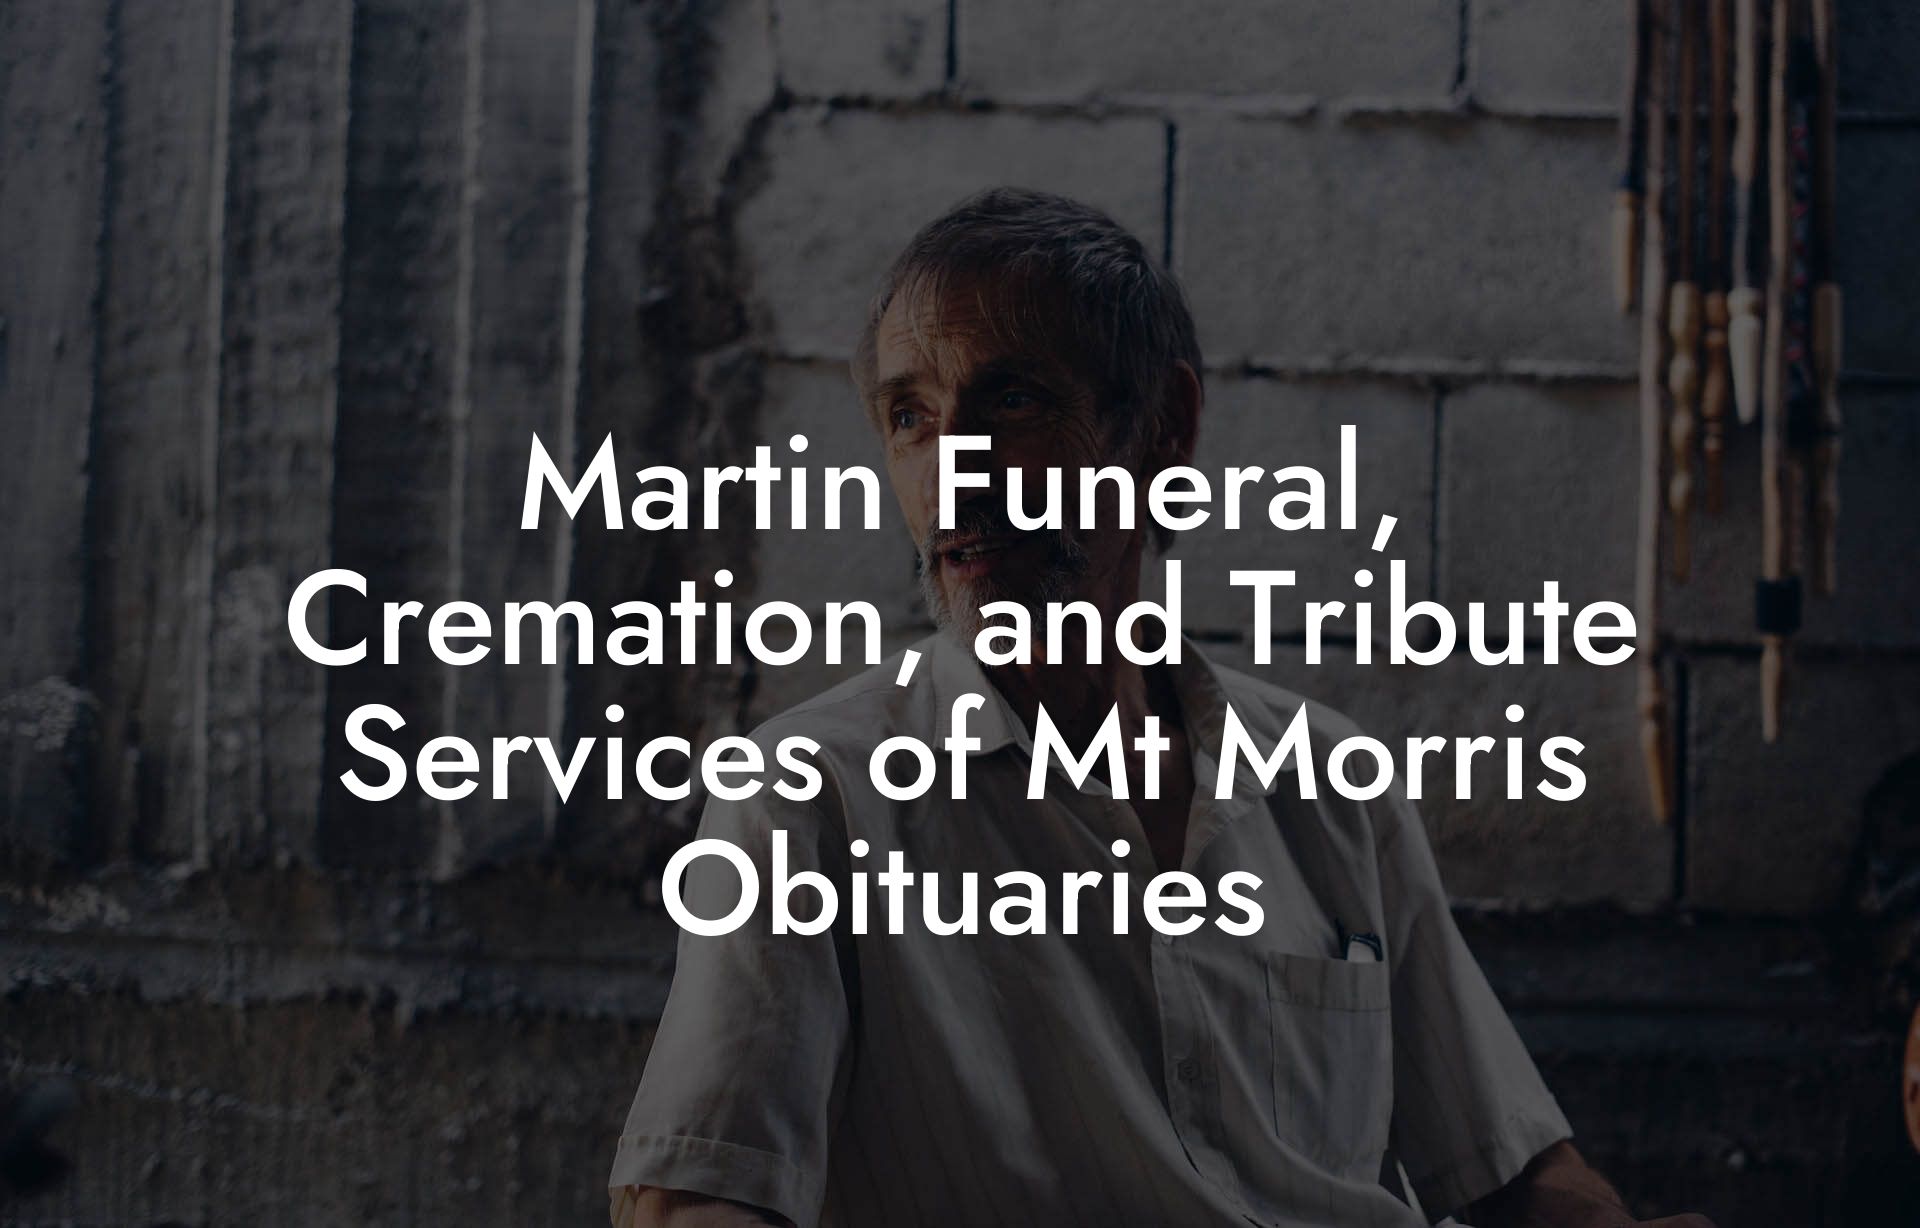 Martin Funeral, Cremation, and Tribute Services of Mt Morris Obituaries